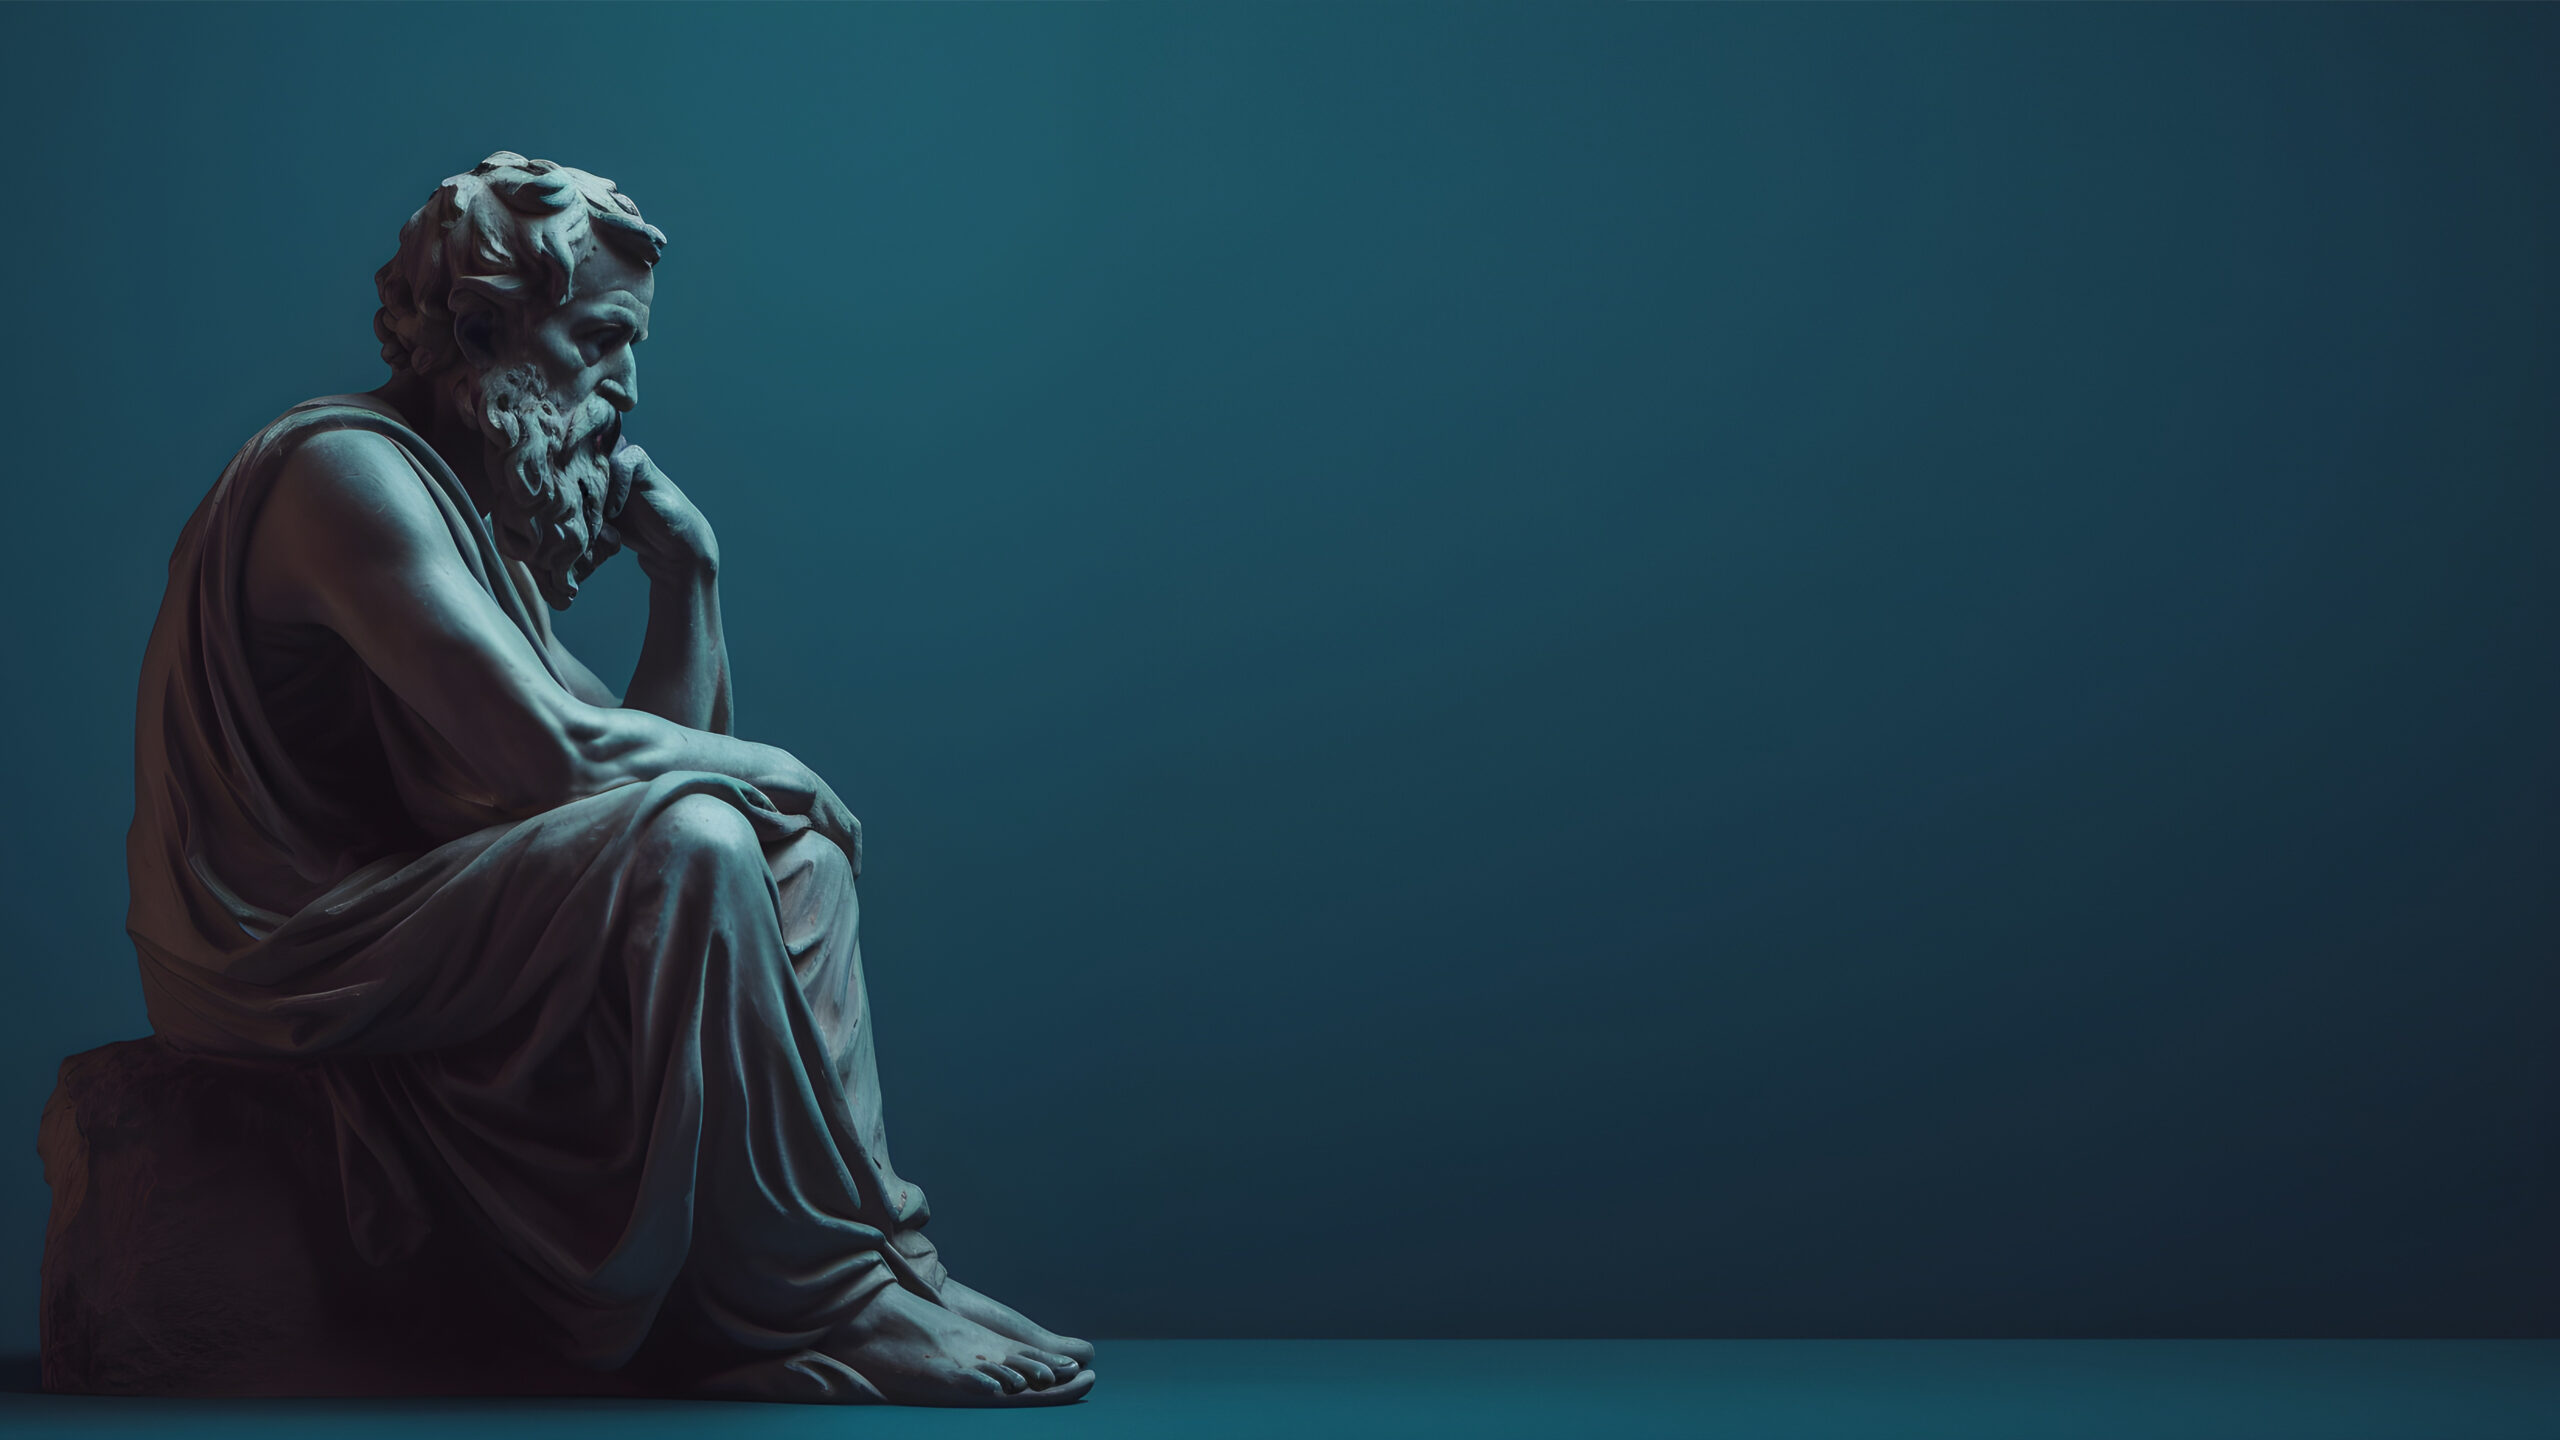 10 Ancient Greek Philosophers and Why They’re Still Influential Today